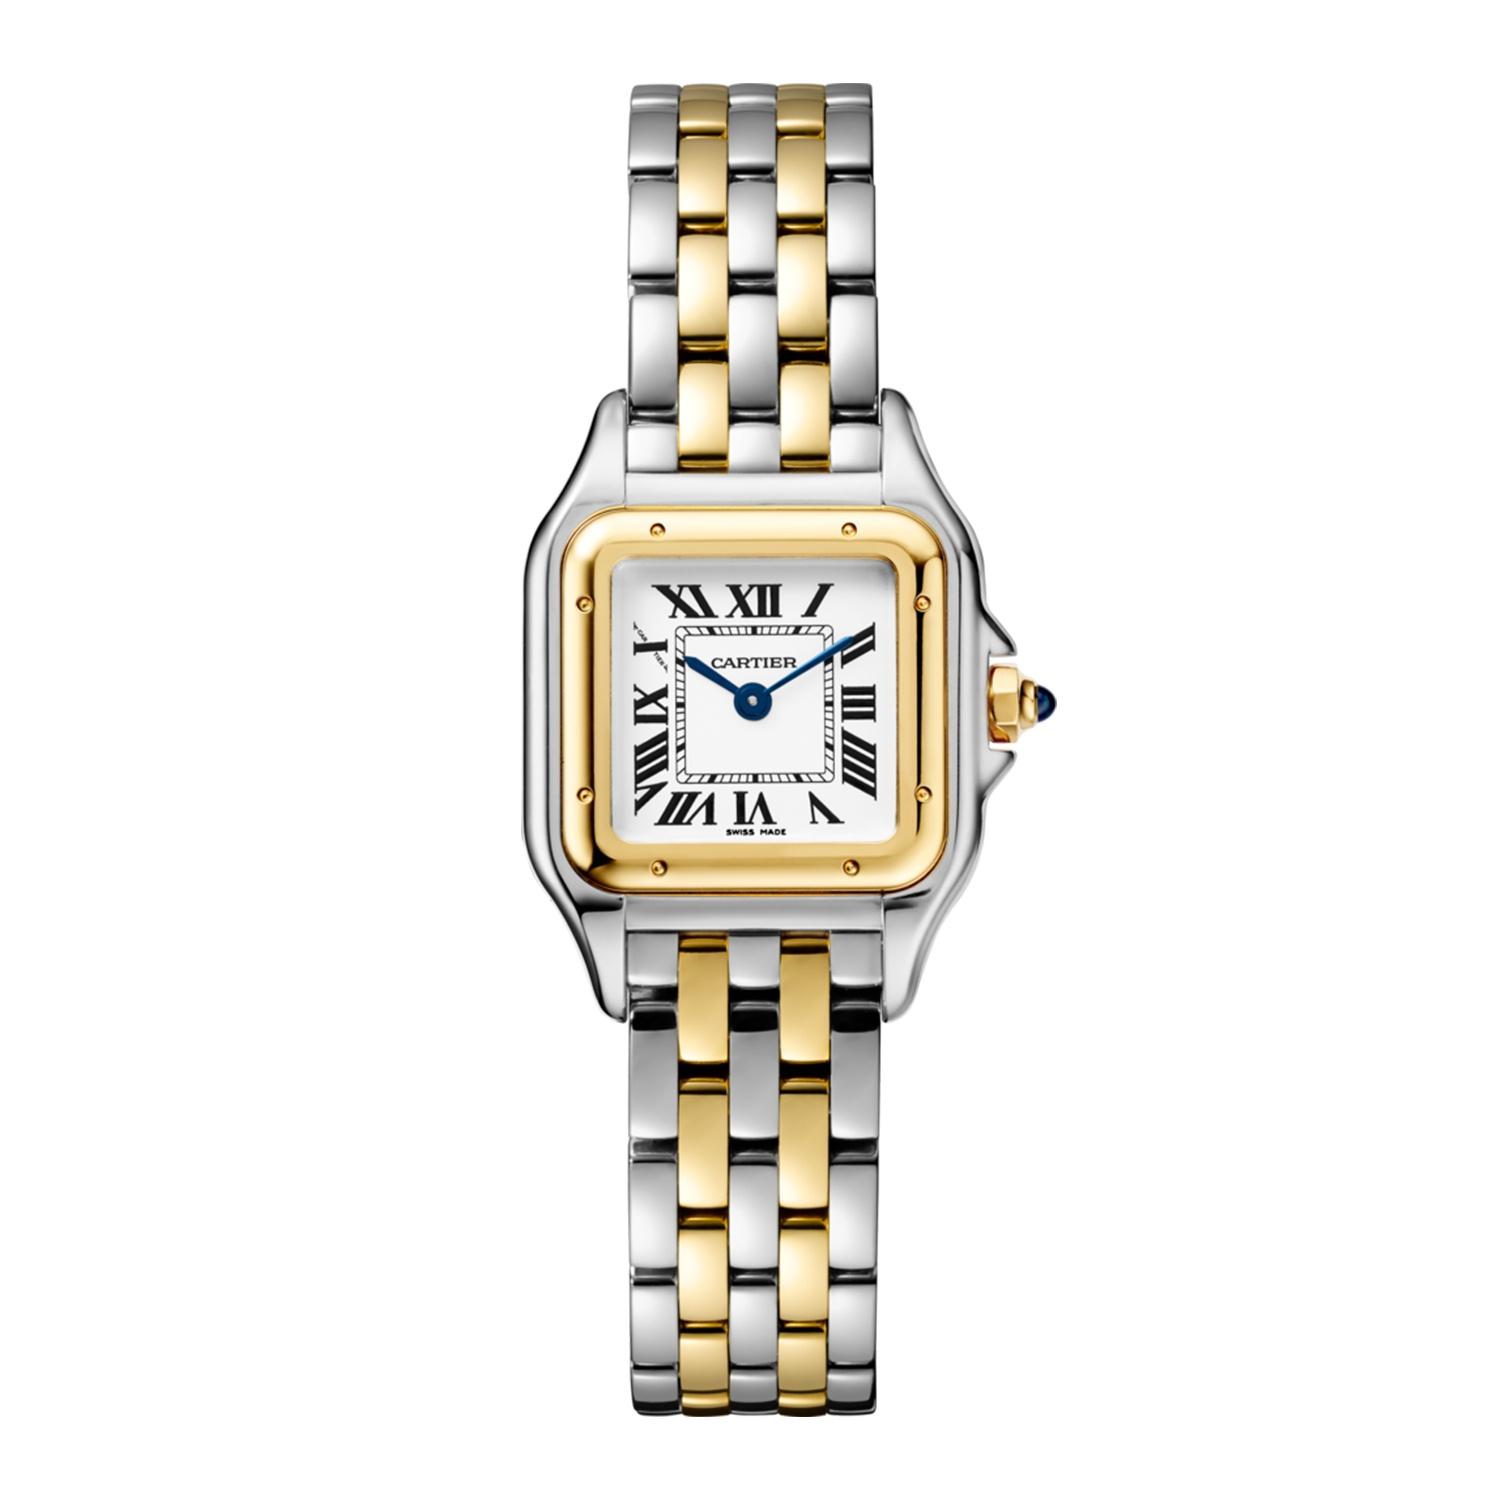 Panthere De Cartier Watch with Stainless Steel and Yellow Gold Bracelet Strap